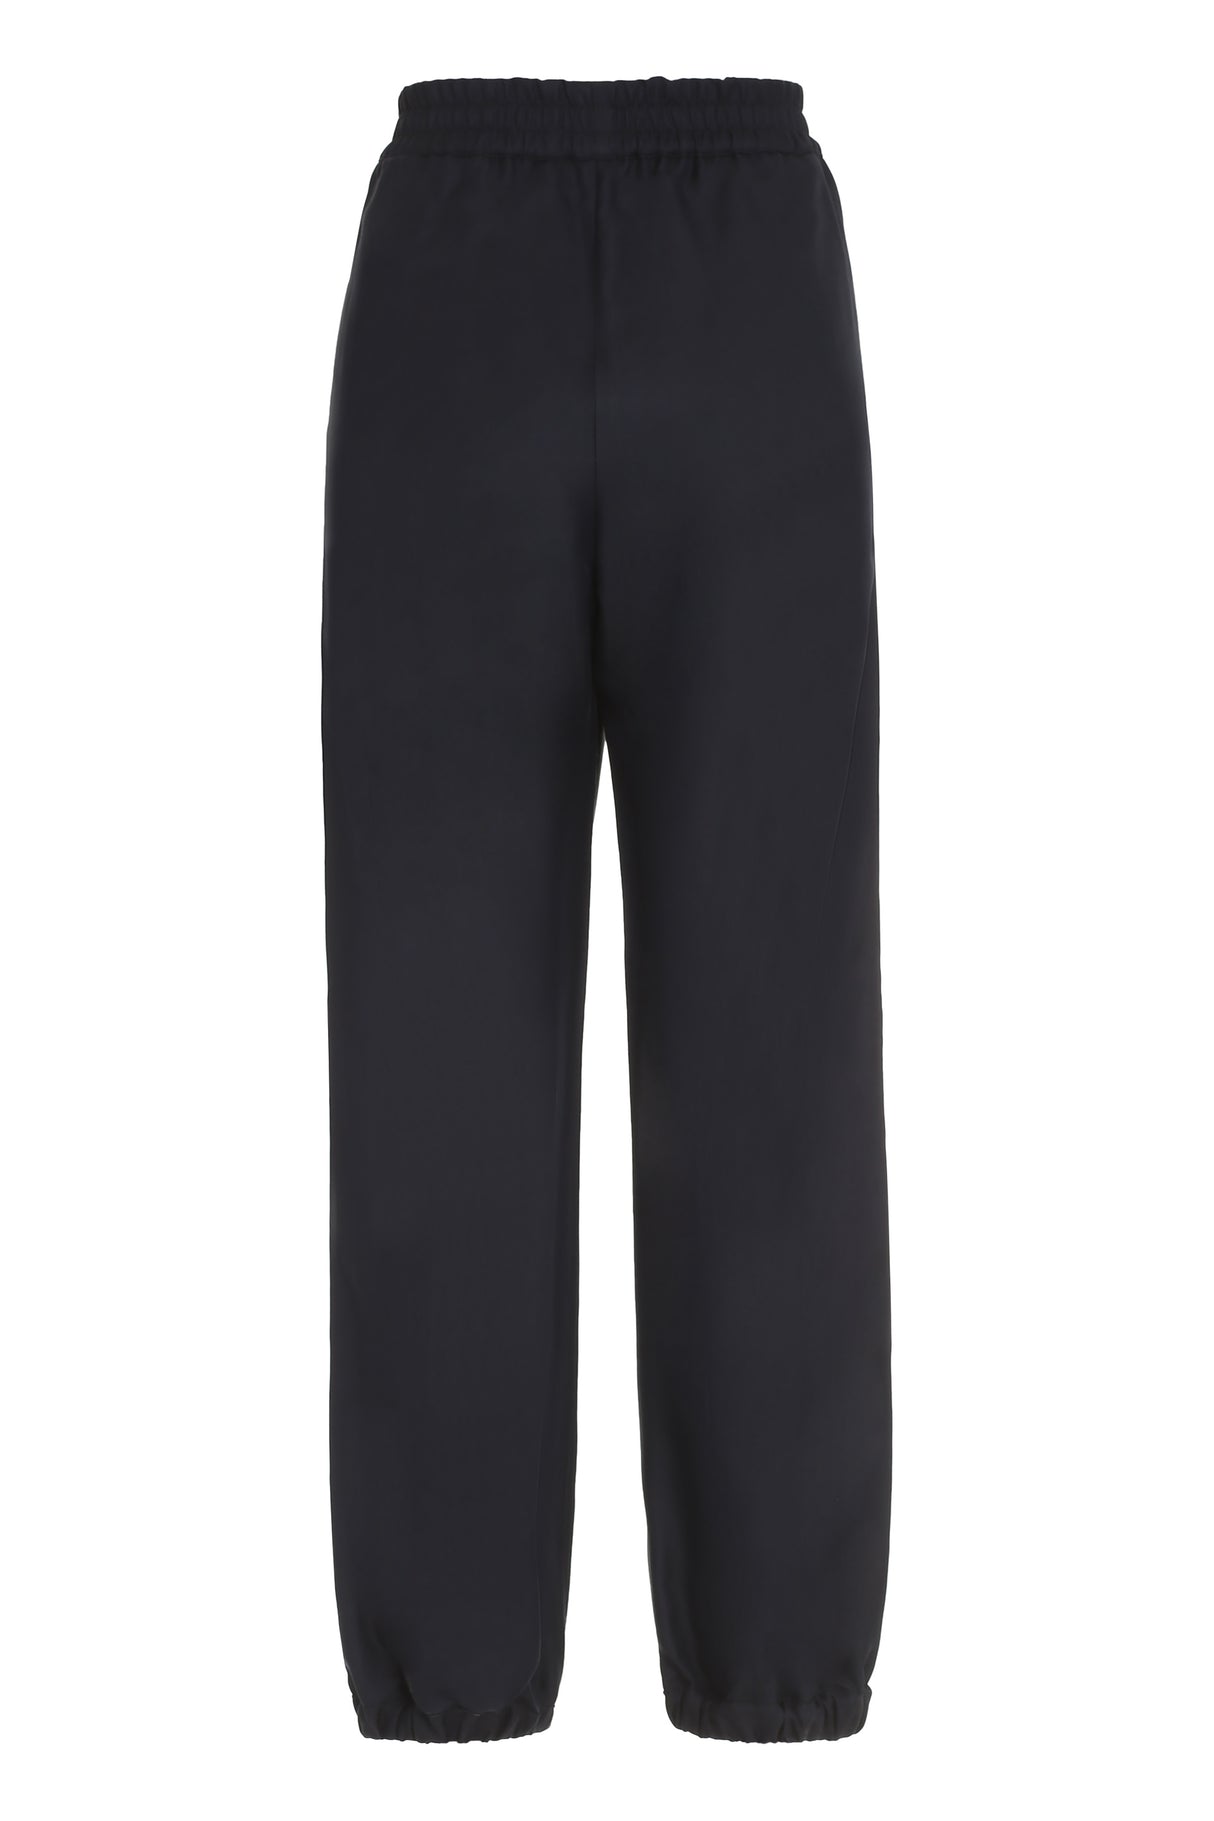 MONCLER Blue Cotton-Twill Bush Trousers with Logo Detail Side Bands and Elasticated Ankle Cuffs